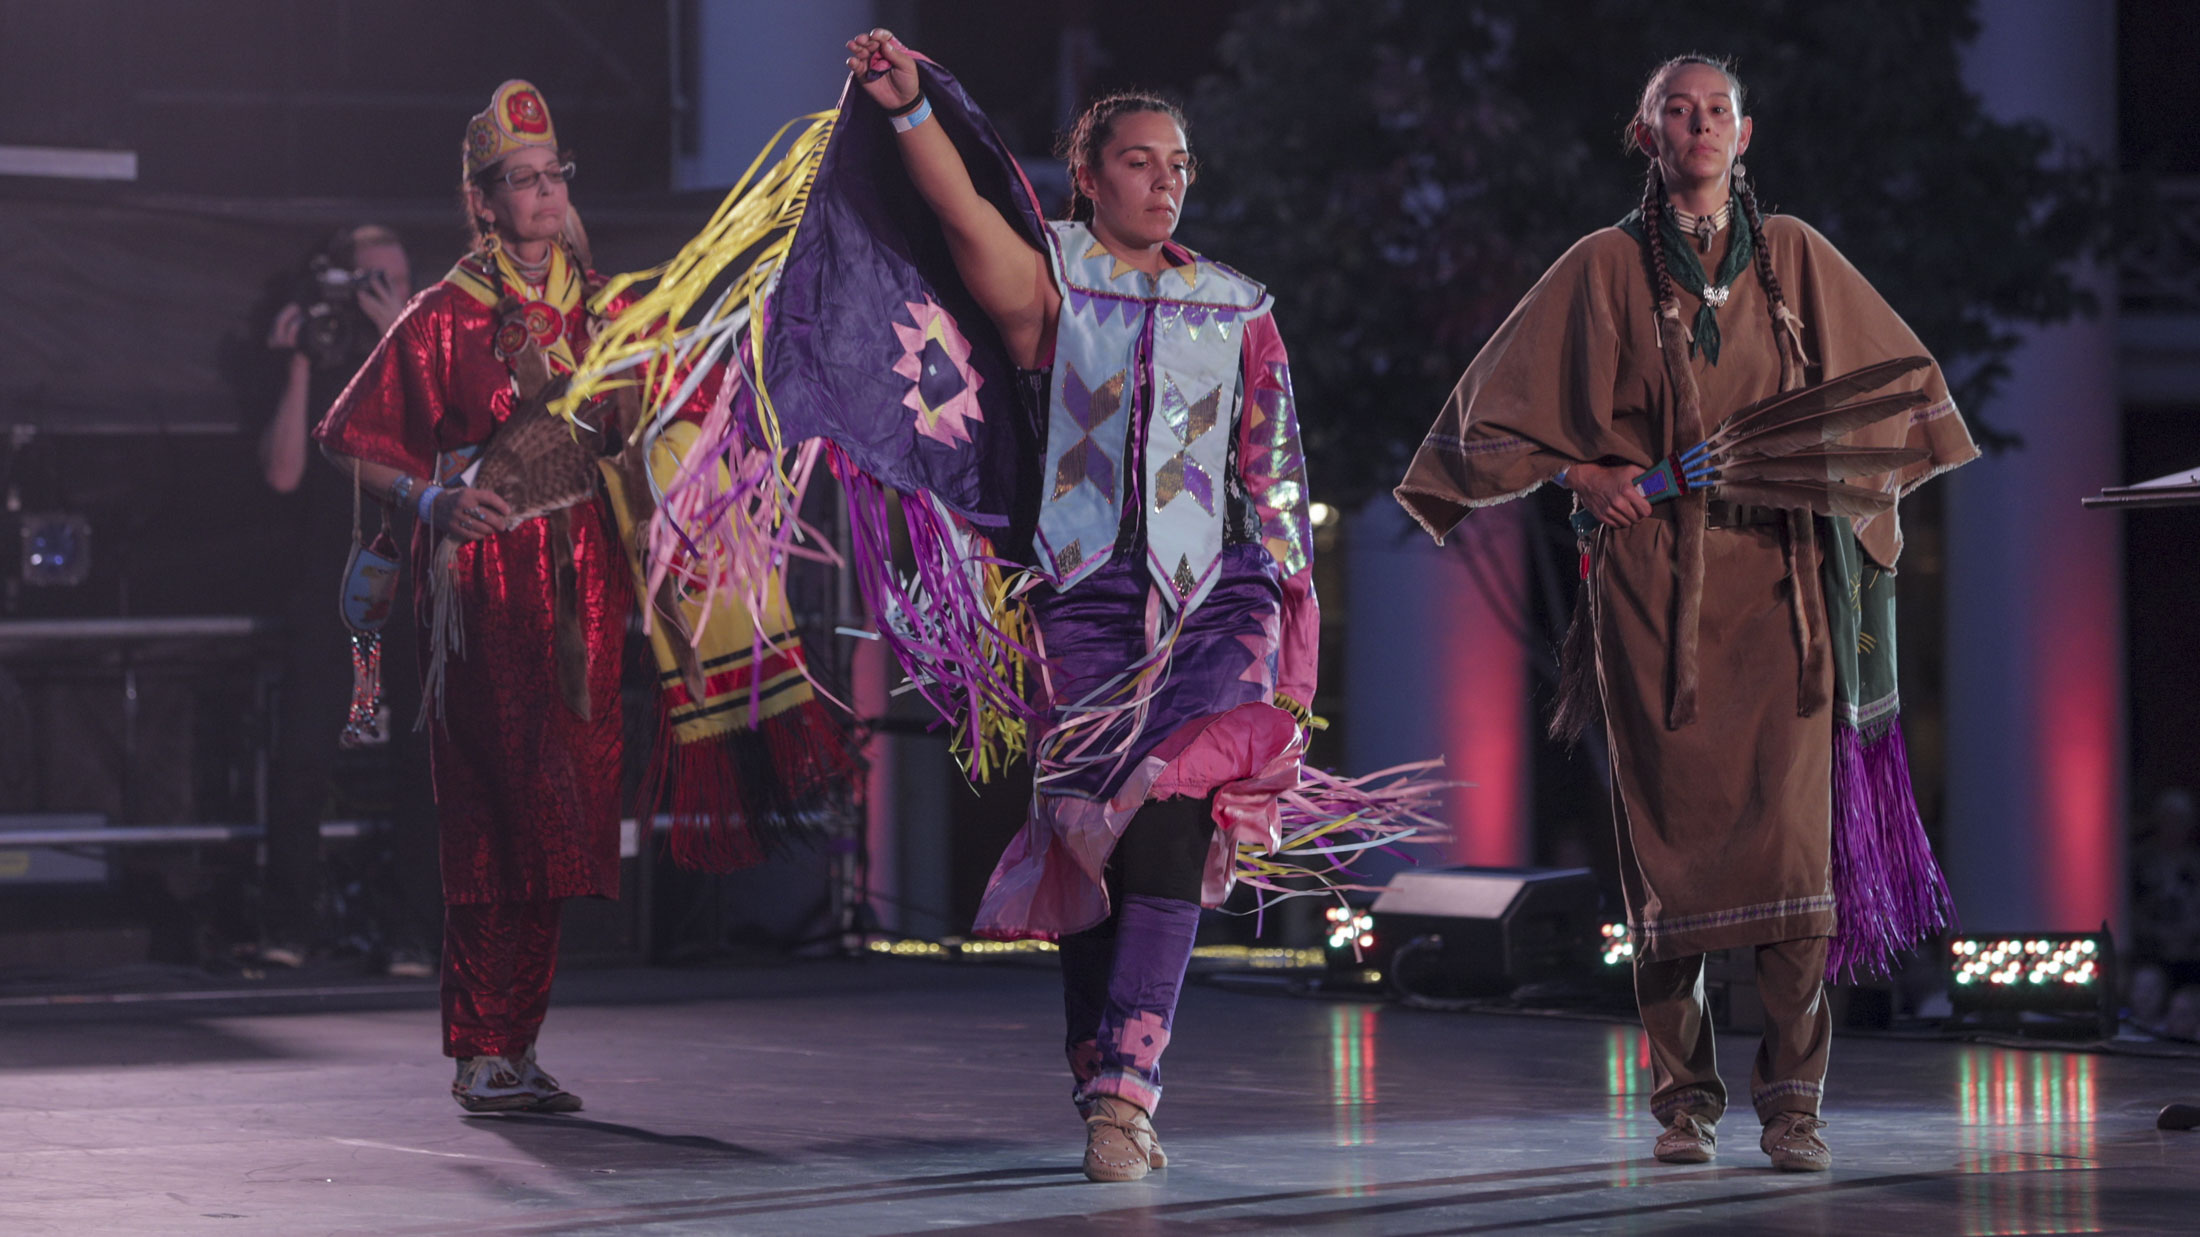 Monocan dancers dancing on stage